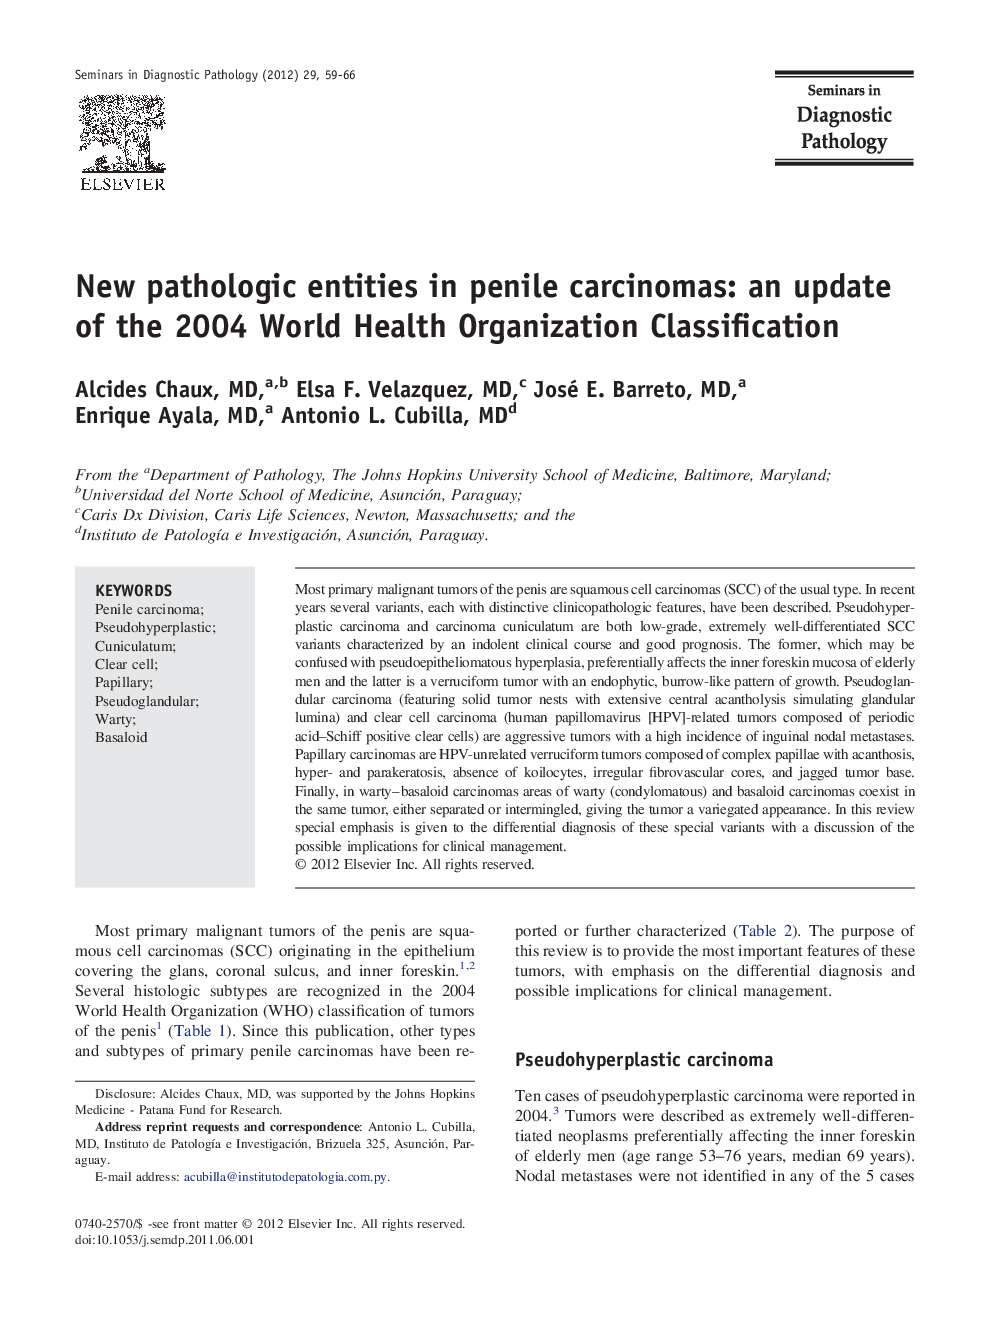 New pathologic entities in penile carcinomas: an update of the 2004 World Health Organization Classification 